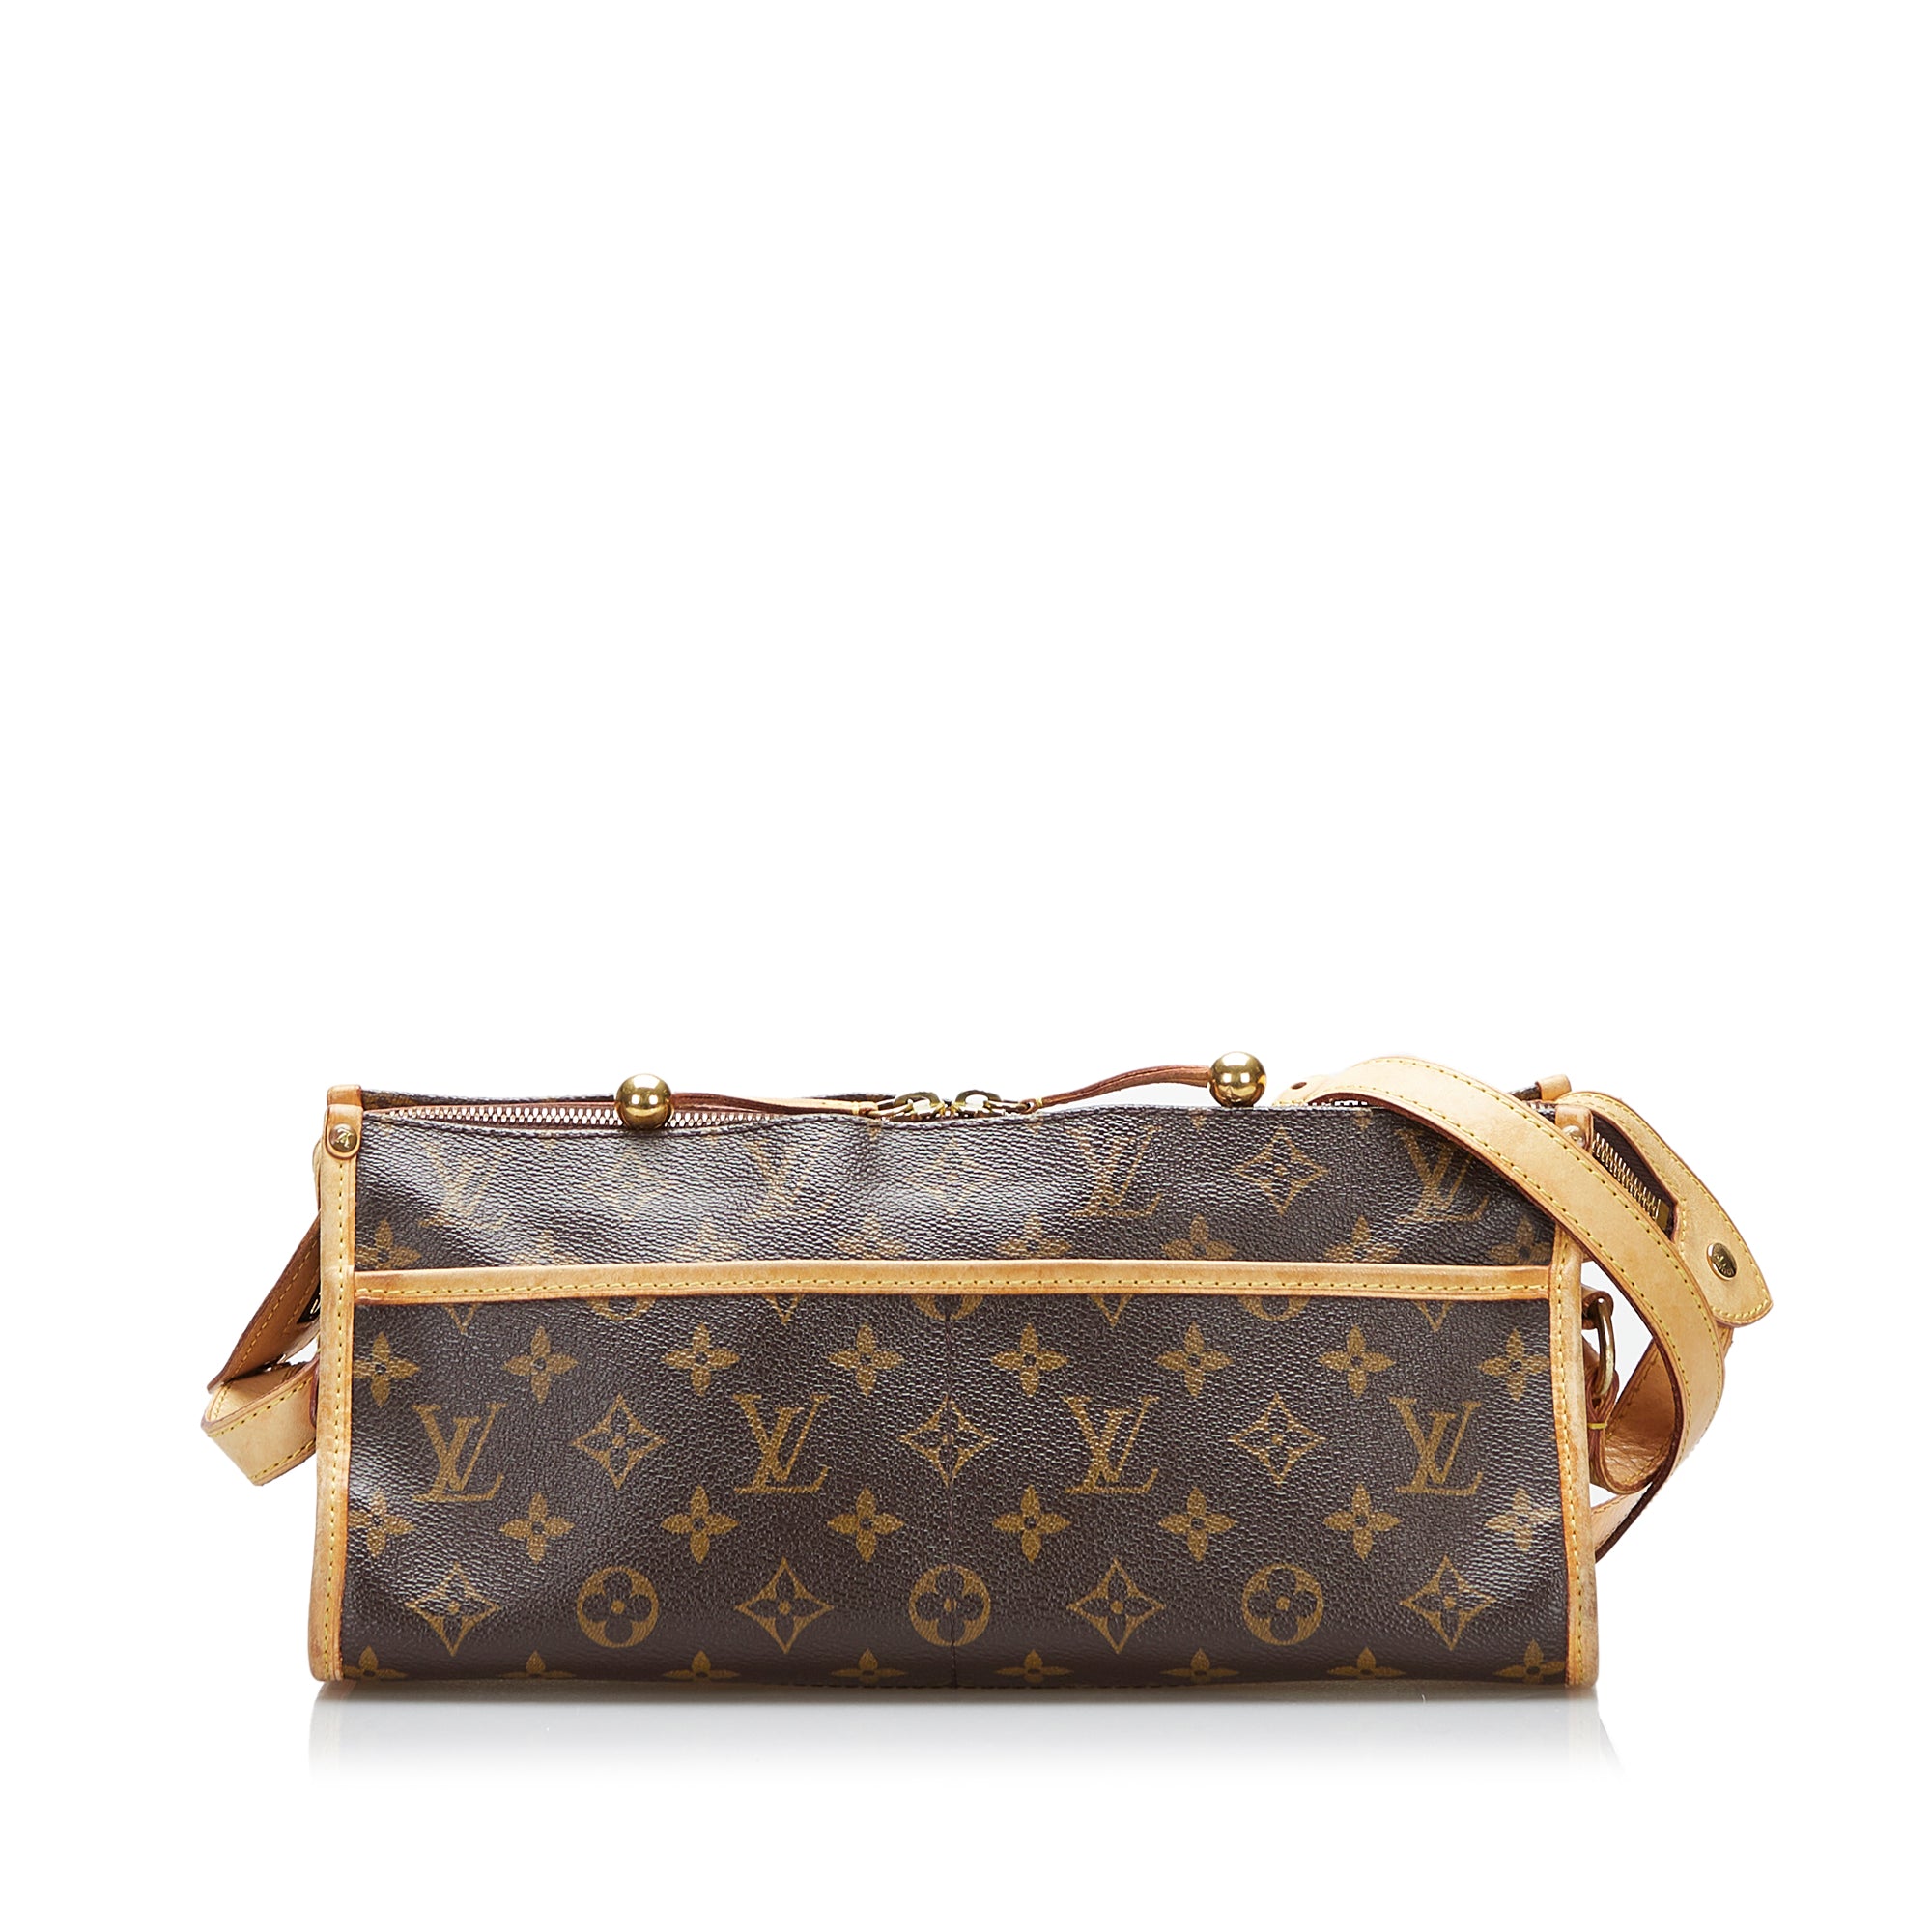 Introducing the Louis Vuitton Side Trunk Bag